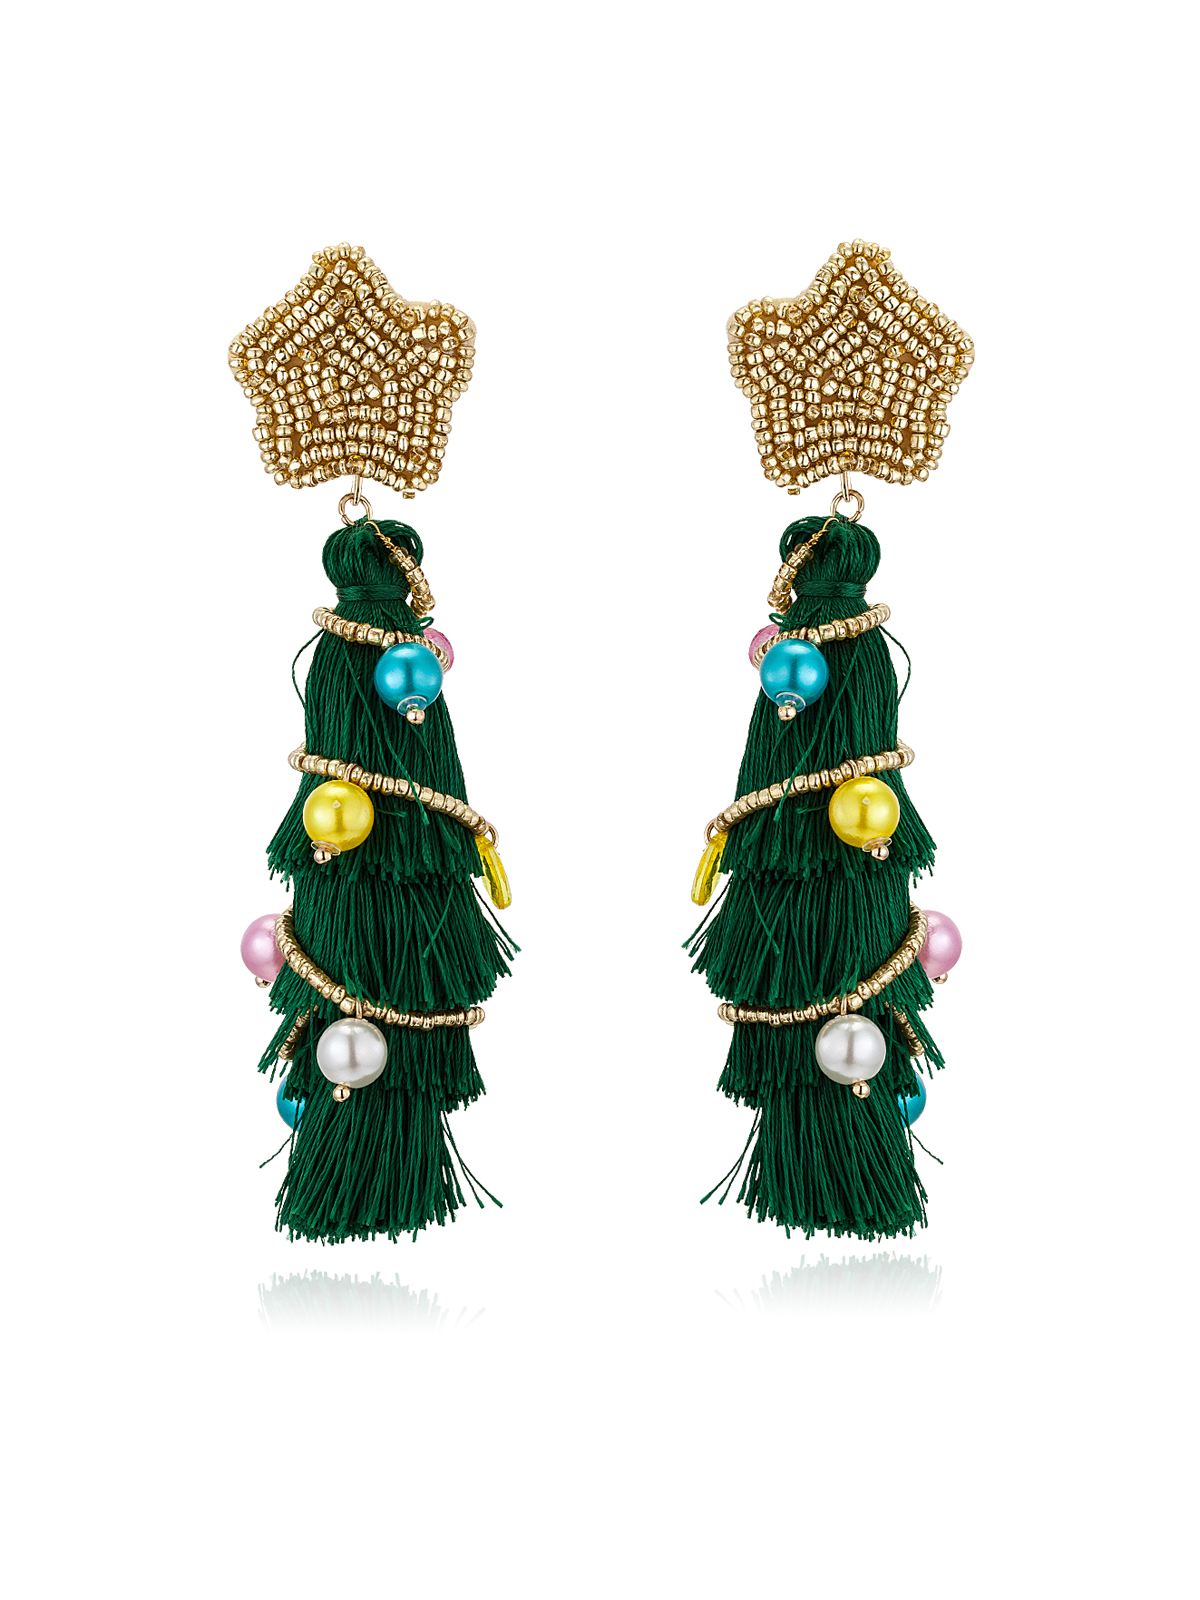 Christmas Tree Long Large Tassel Golden Beaded Earrings Bohemian 4 Tier Big Dangle Drop Green Earrings Twined with Colored Beads Earring for Women Girls Tiered Tassel Druzy Stud Earrings Women Gifts - Click Image to Close